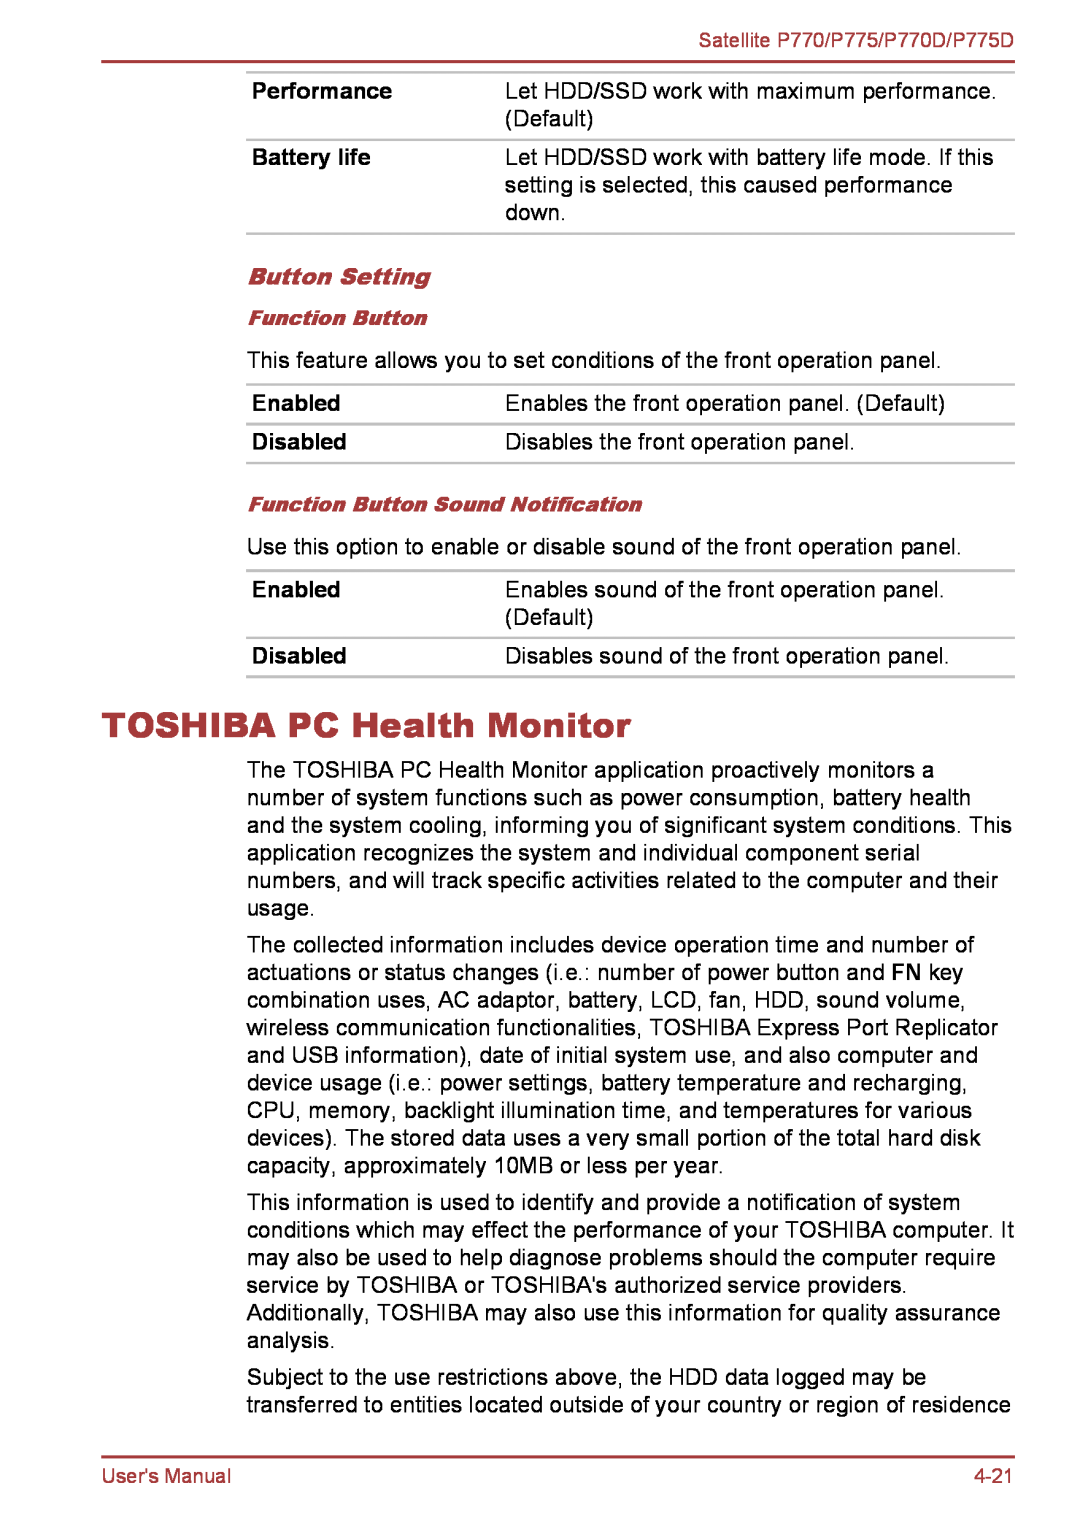 Toshiba P770 TOSHIBA PC Health Monitor, Performance, Battery life, Button Setting, Disables the front operation panel 